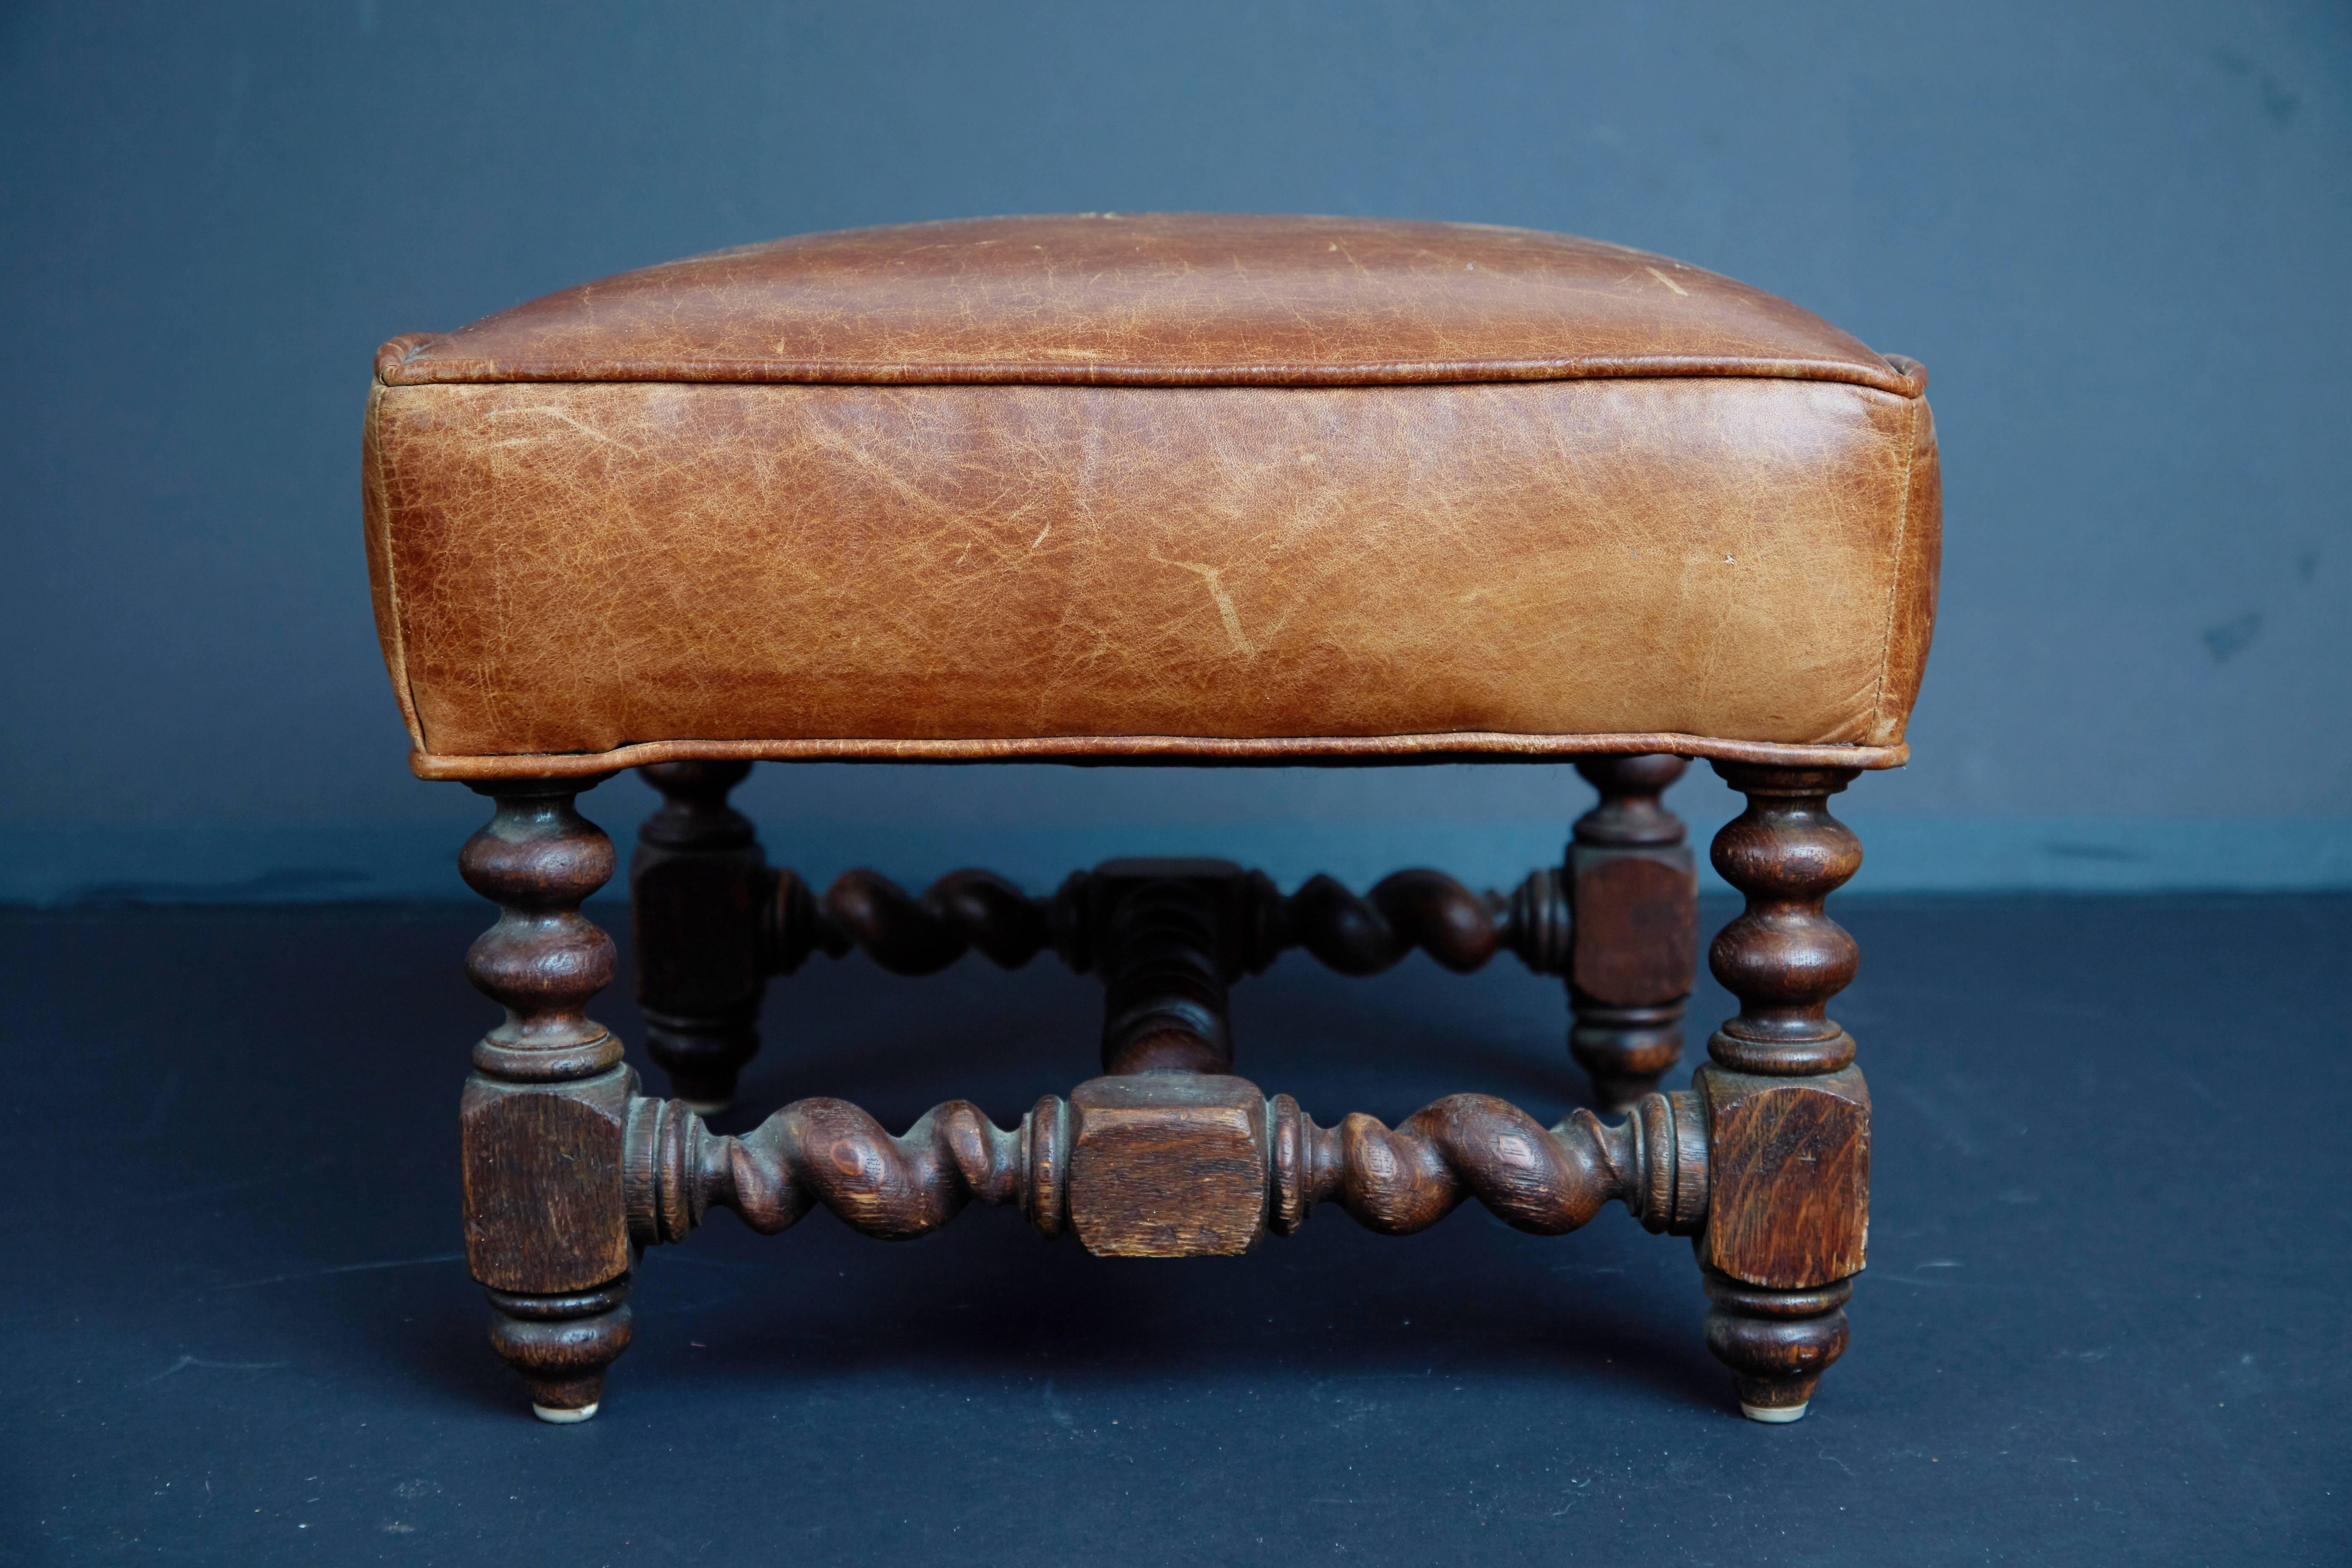 Beautifully crafted Spanish Baroque style footstool or ottoman featuring tan leather upholstery and turned wood base finished in a rich dark stain. The original leather upholstery has developed an admirable patina. These traces of age and use bring